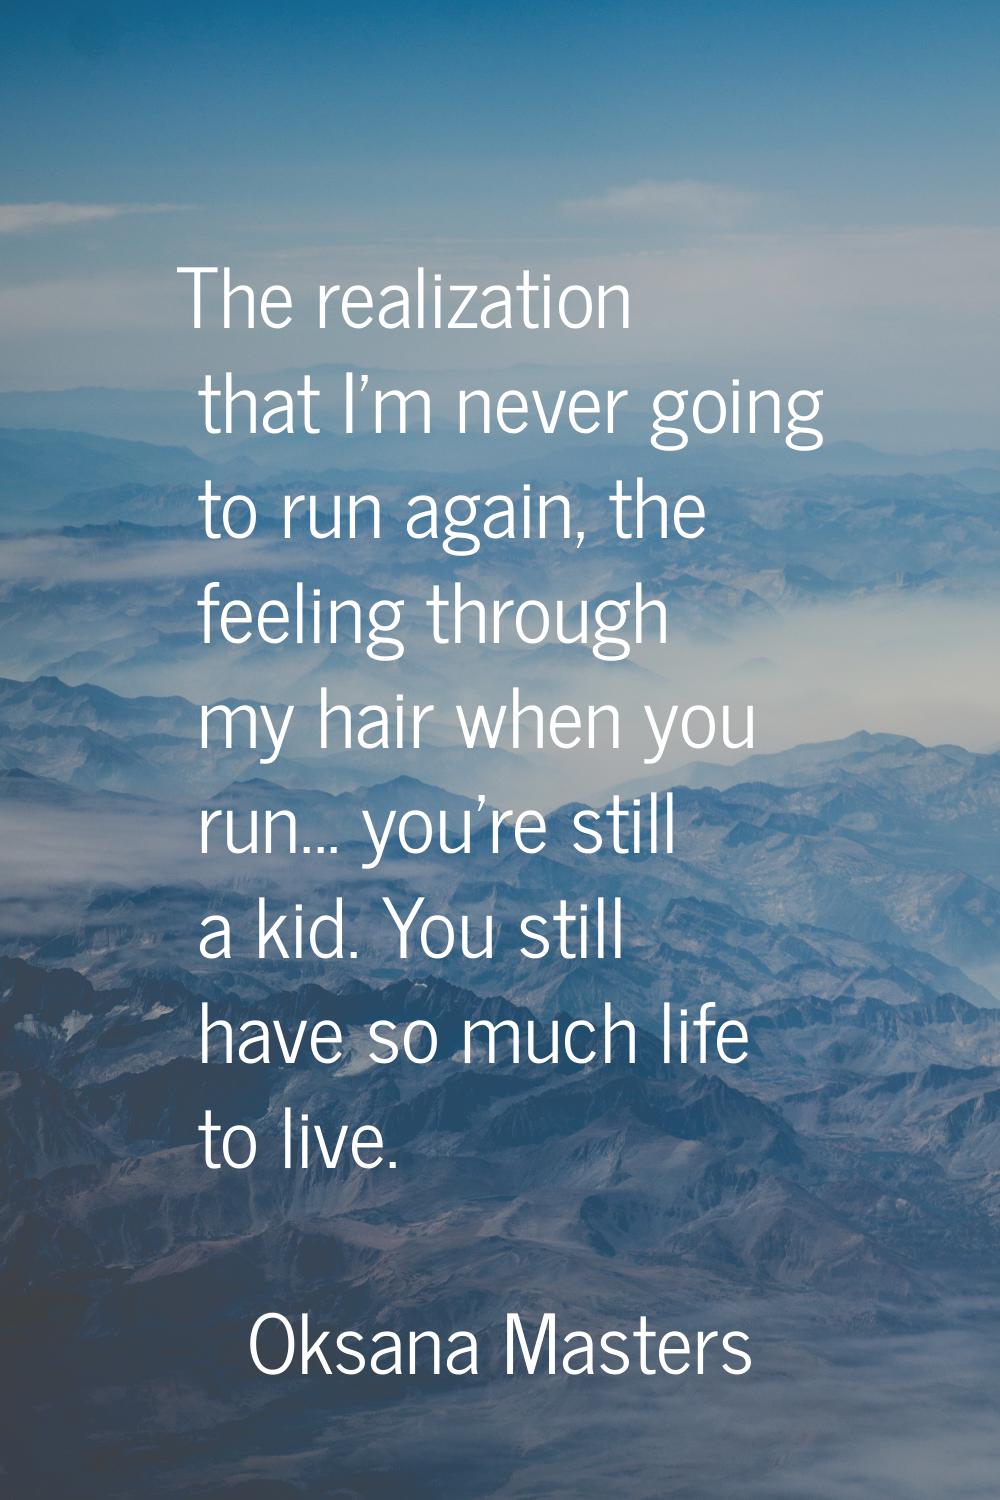 The realization that I'm never going to run again, the feeling through my hair when you run... you'